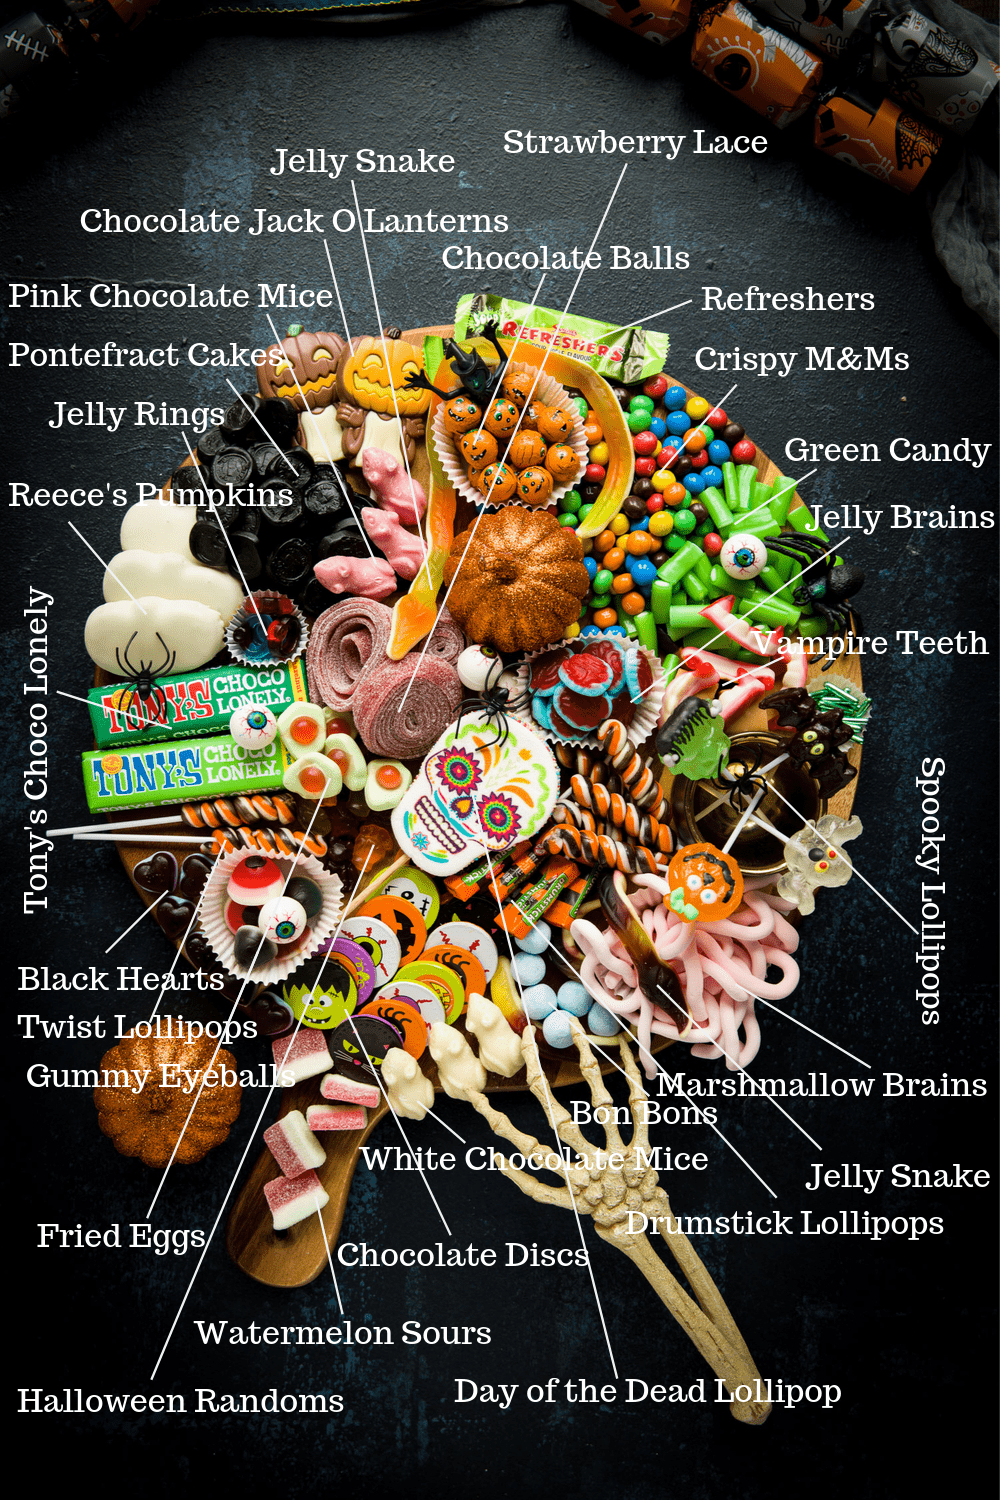 A Halloween platter filled with sweets, candy and chocolate. The image is labelled with the names of all the items used. 